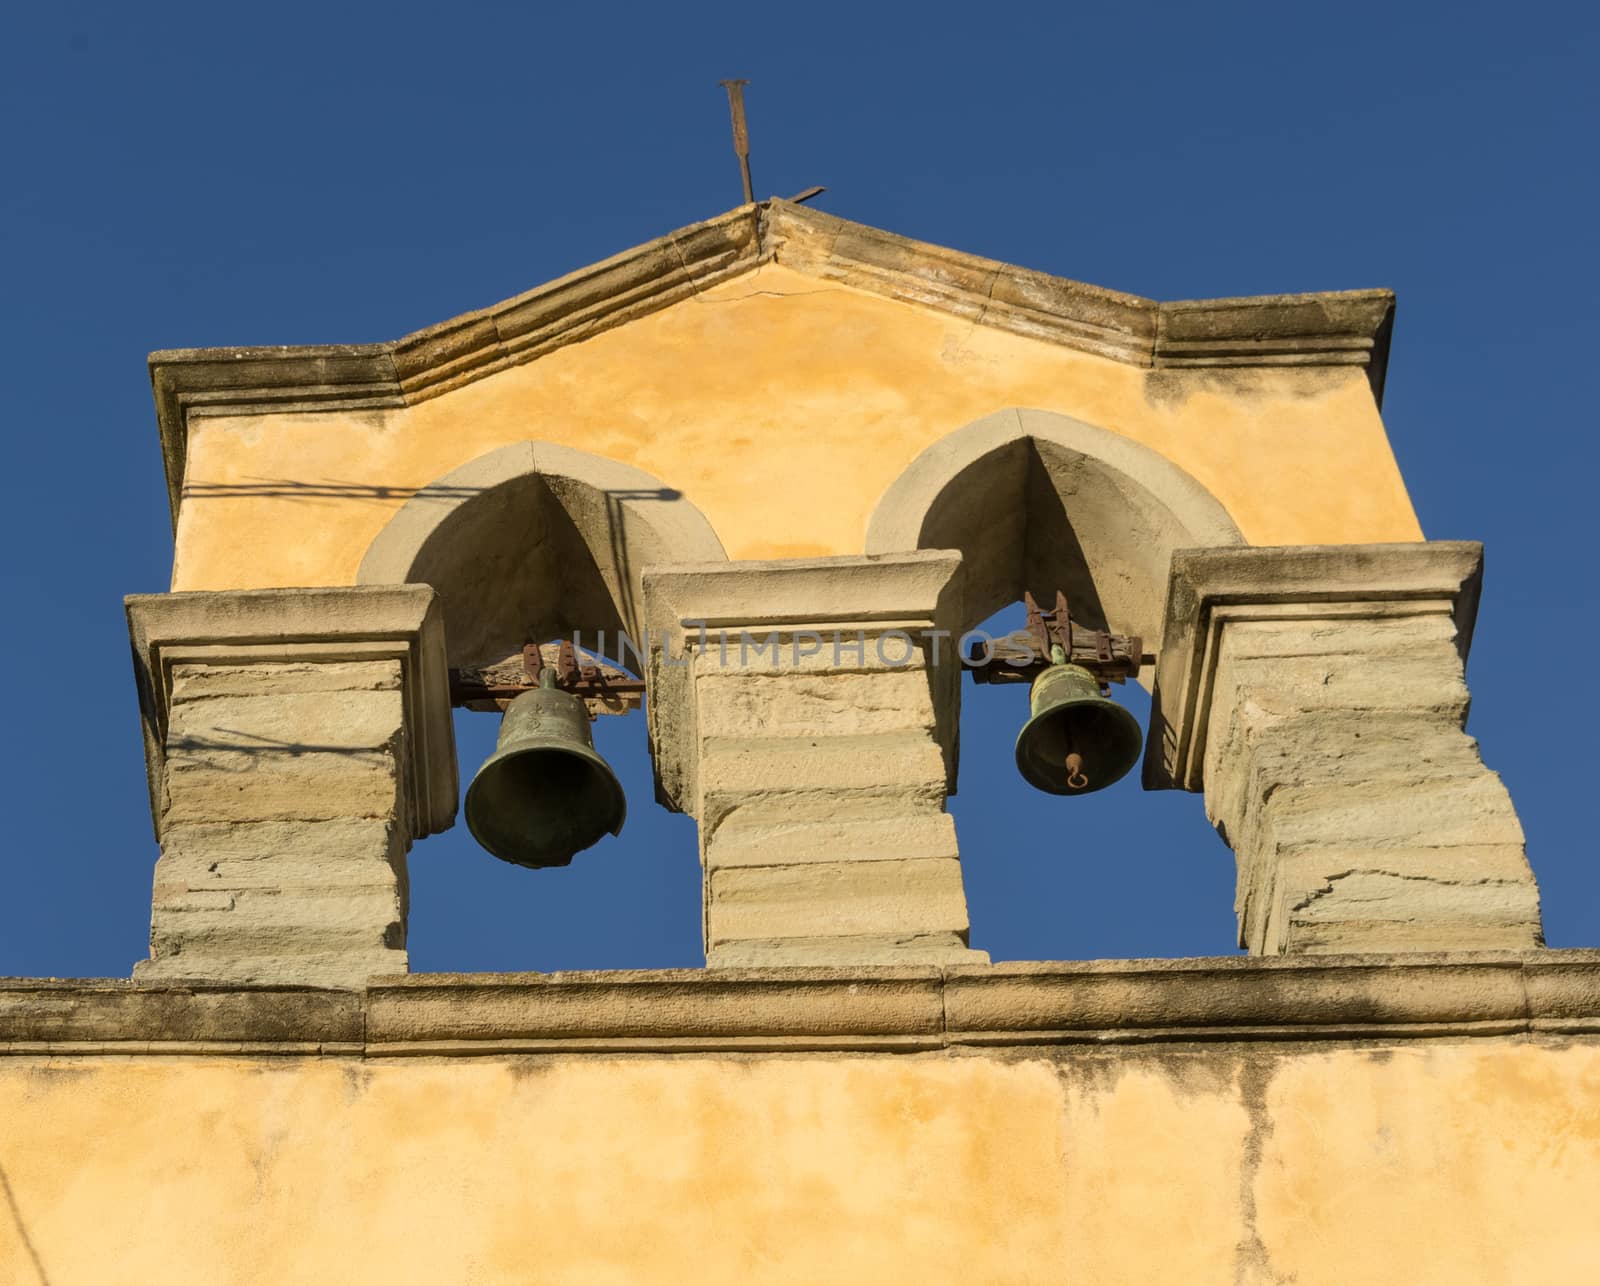 Bells in the bell tower of a small country church